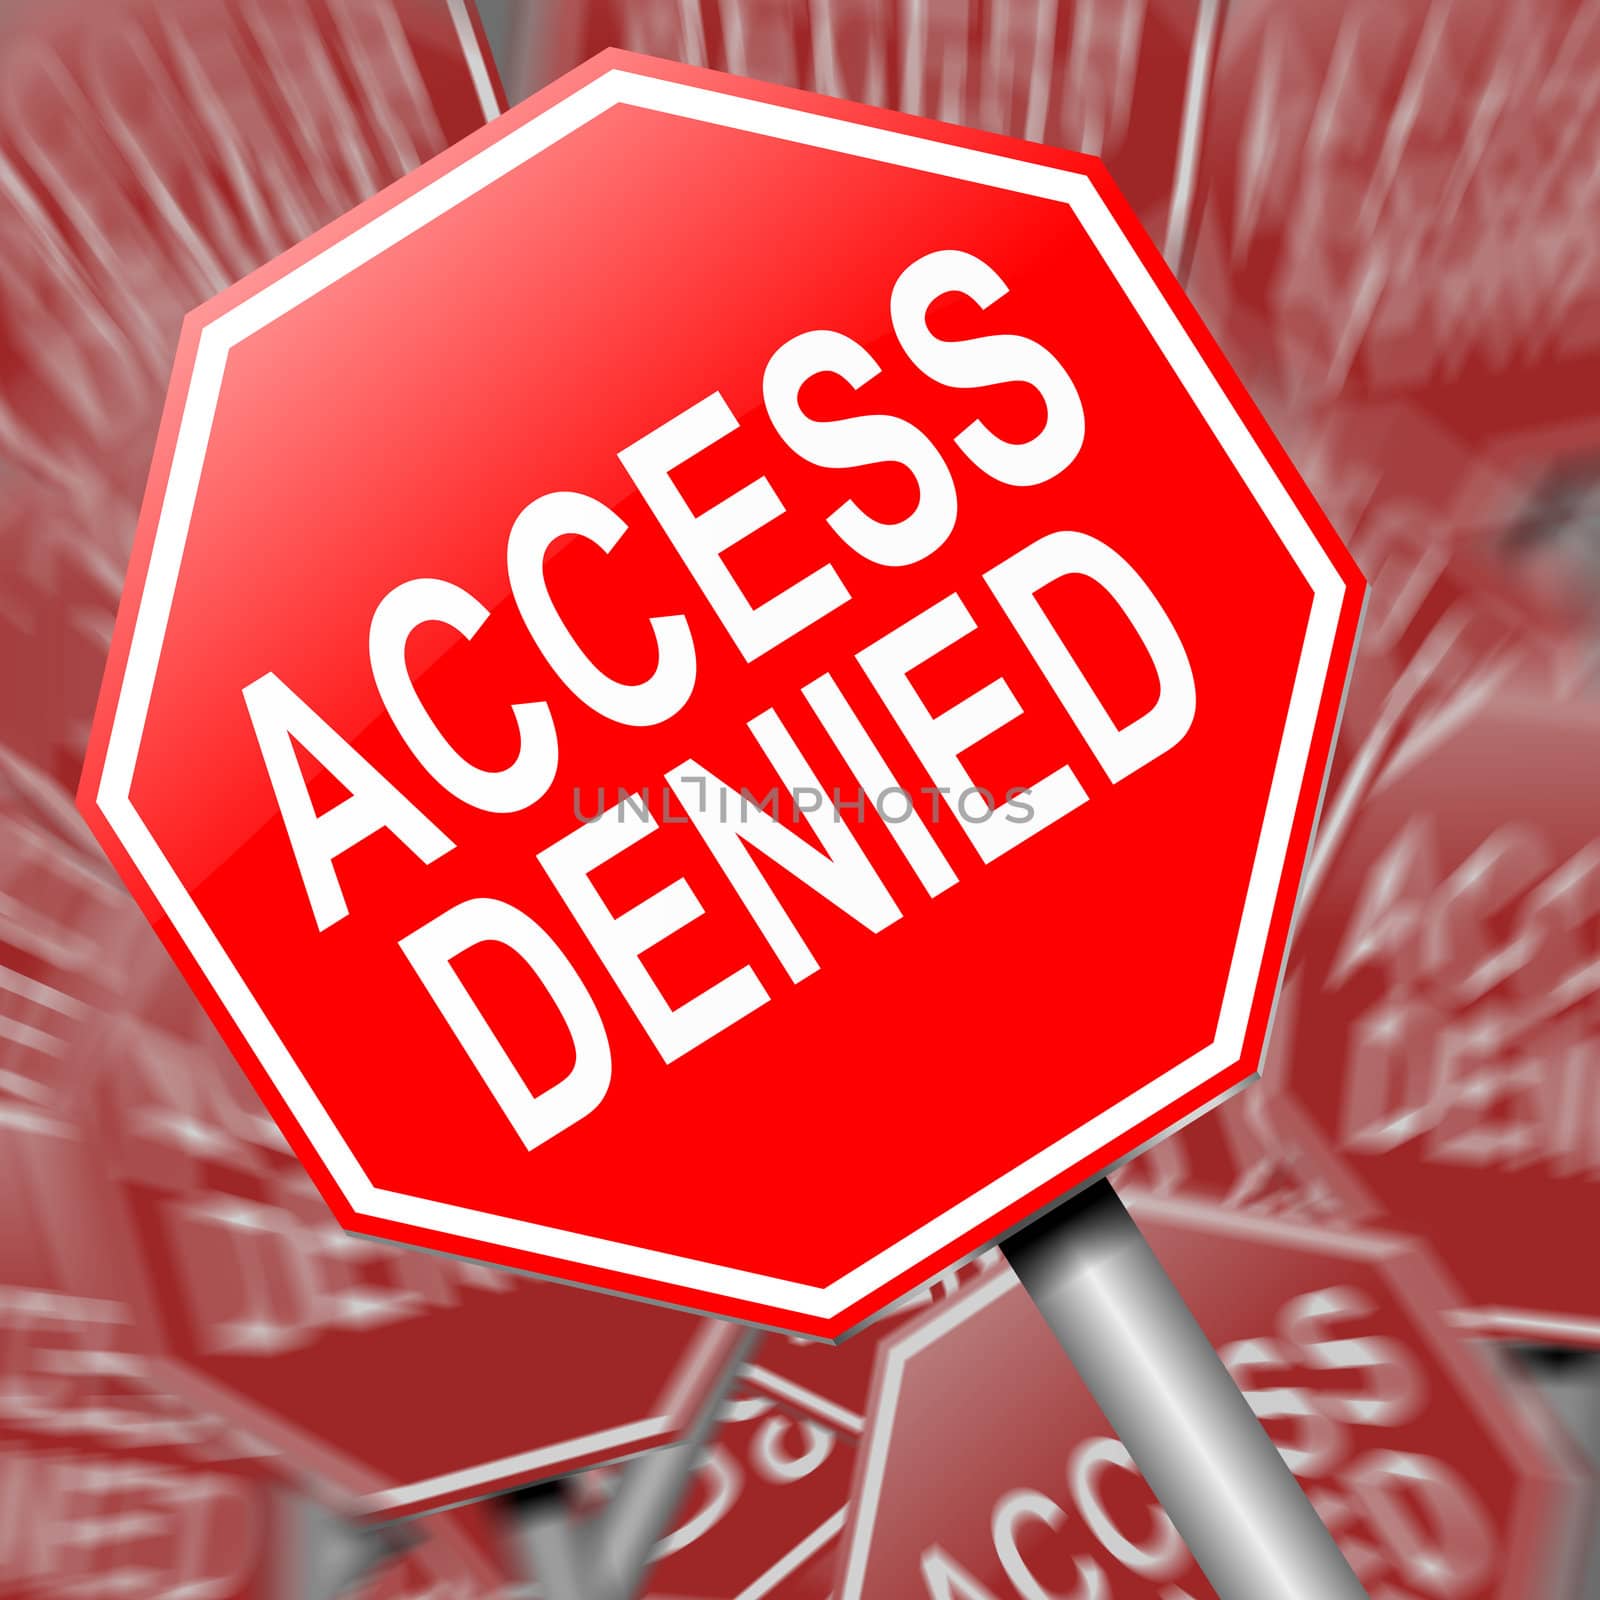 Illustration depicting a sign with an access denied concept.